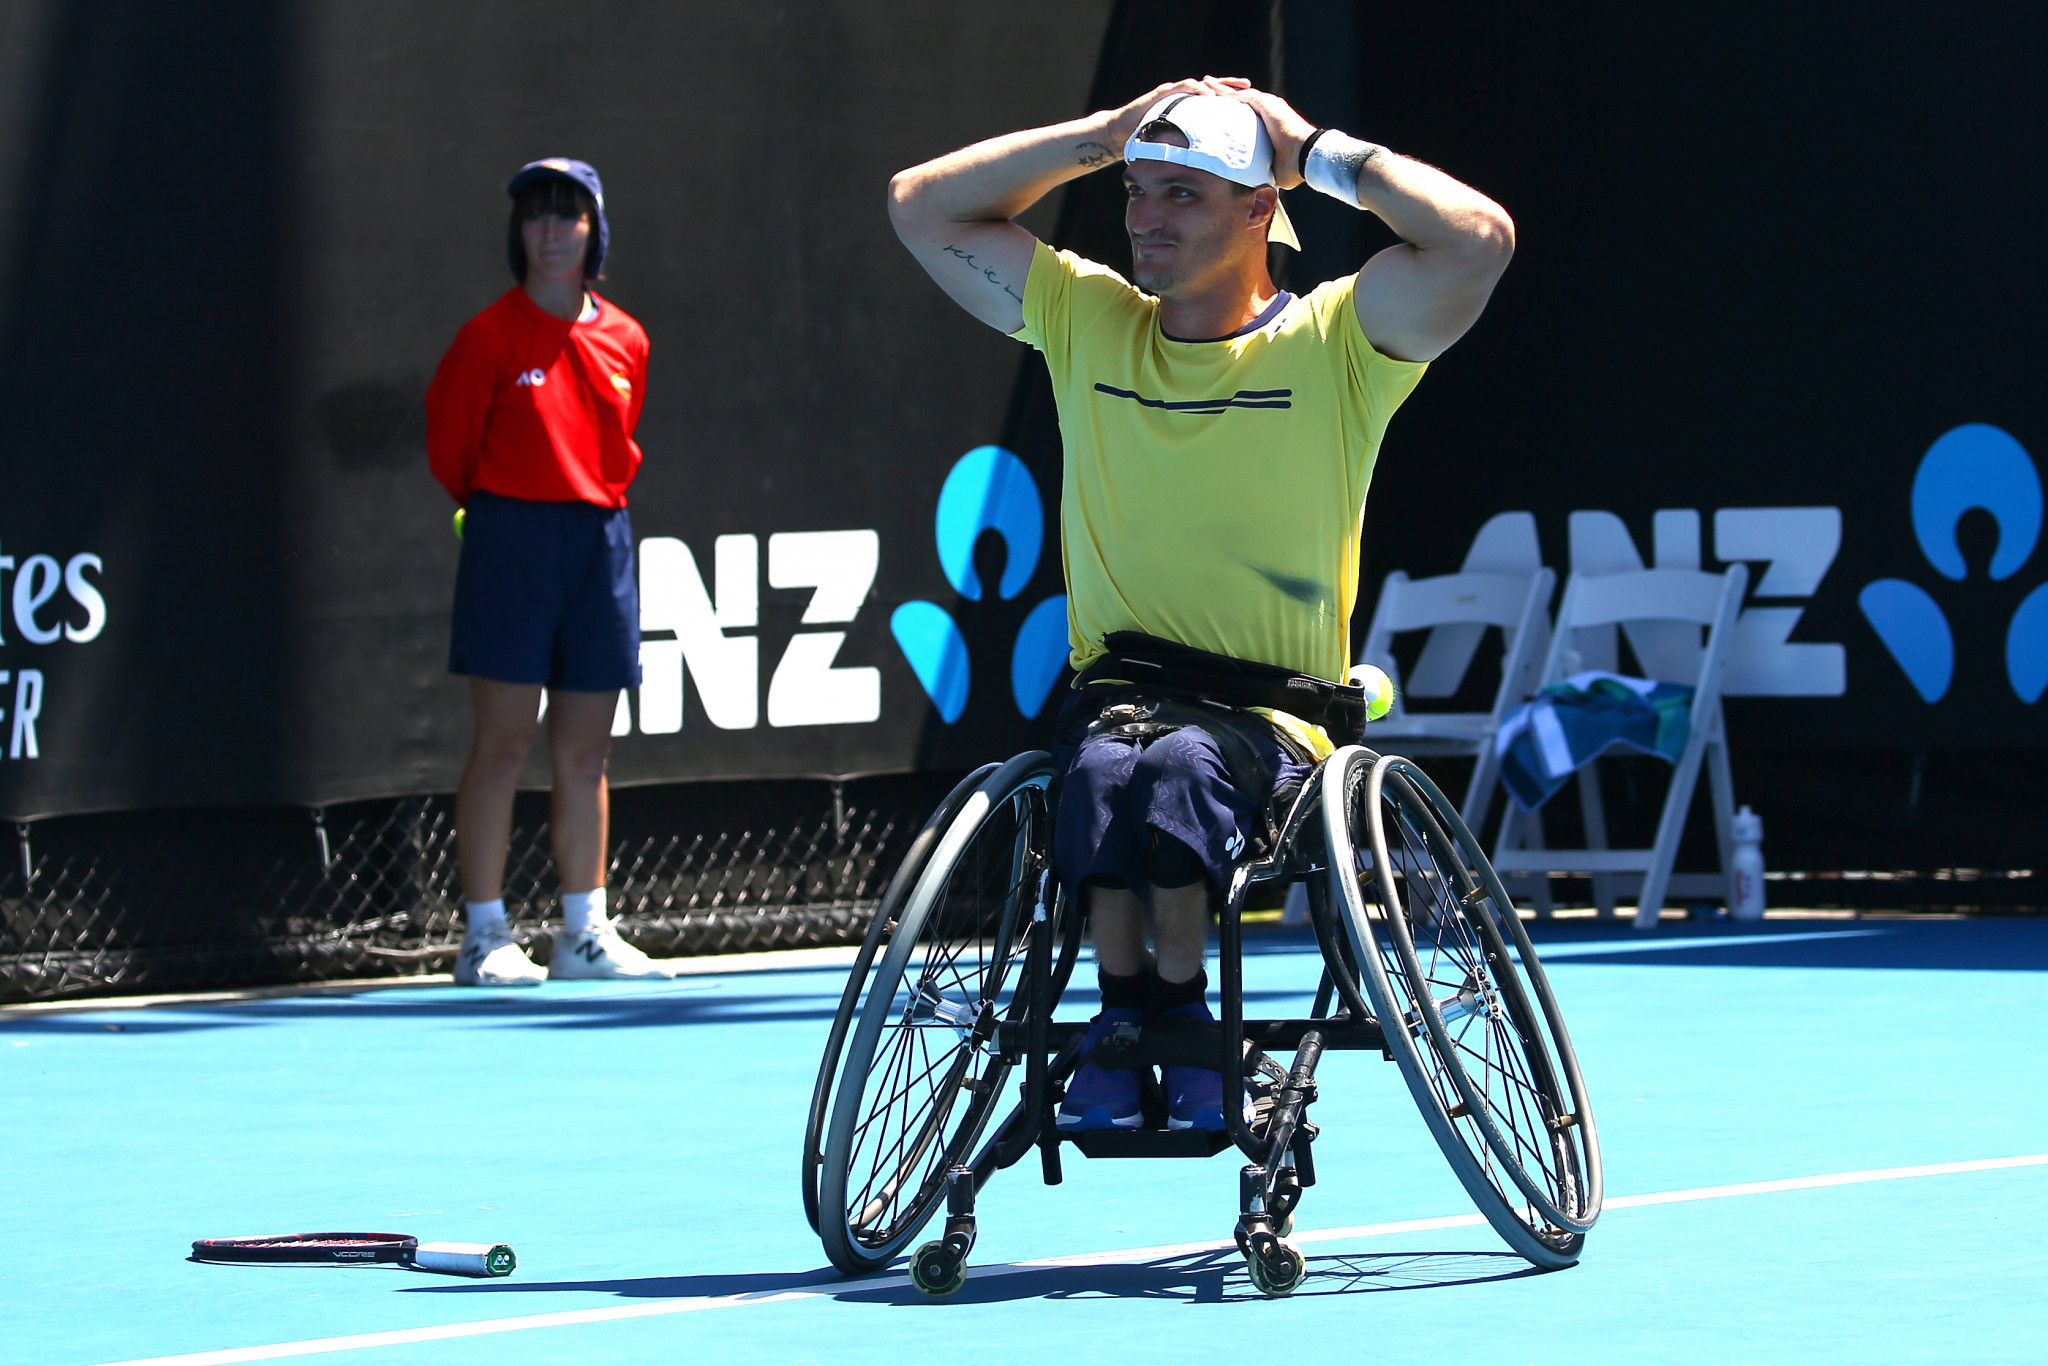 Argentina's wheelchair tennis player Gustavo Fernandez came second in the public vote ©Getty Images